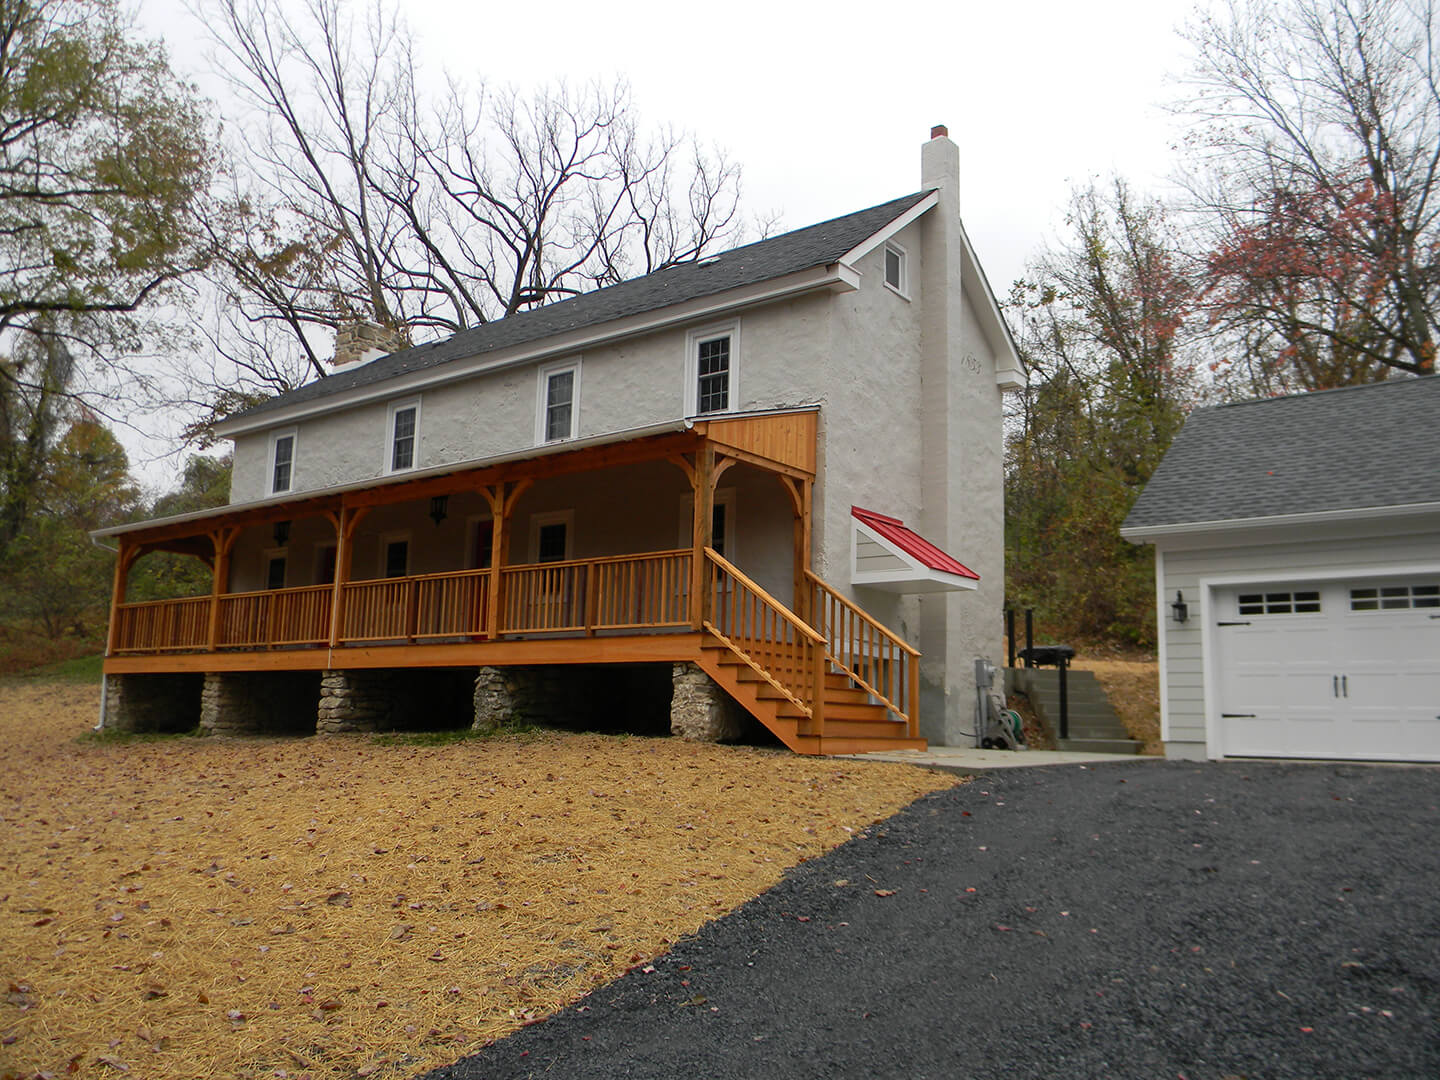 photo after completed home and garage renovation on historic farmhouse in brandywine, pa